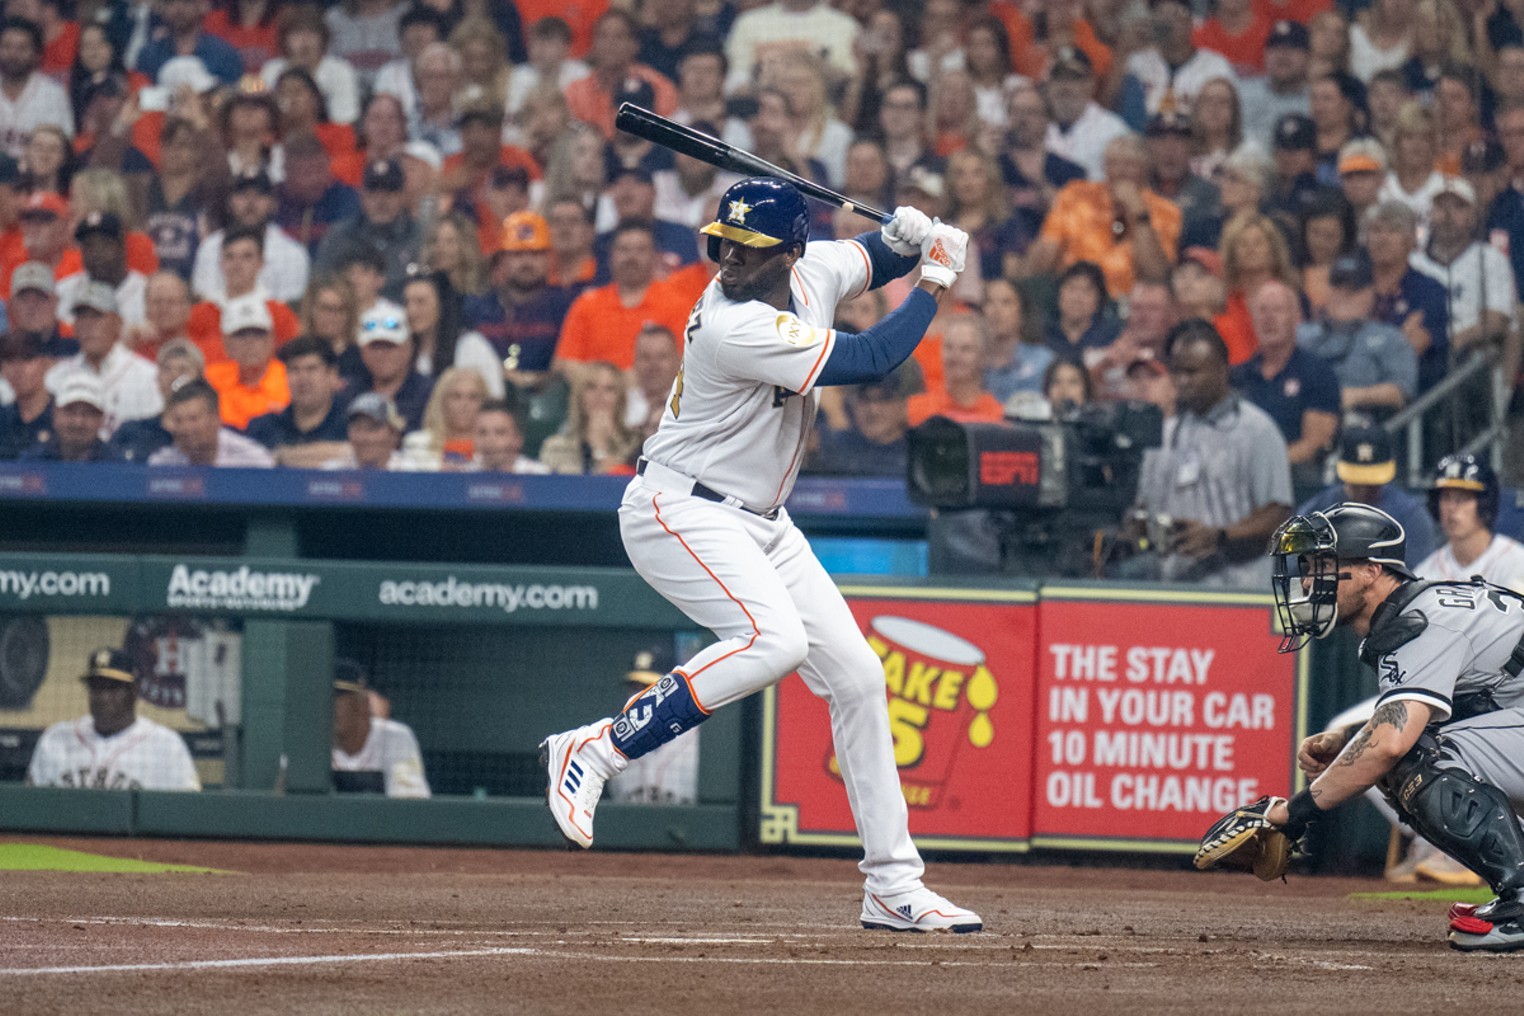 Jose Altuve scratched from Astros lineup due to left oblique discomfort